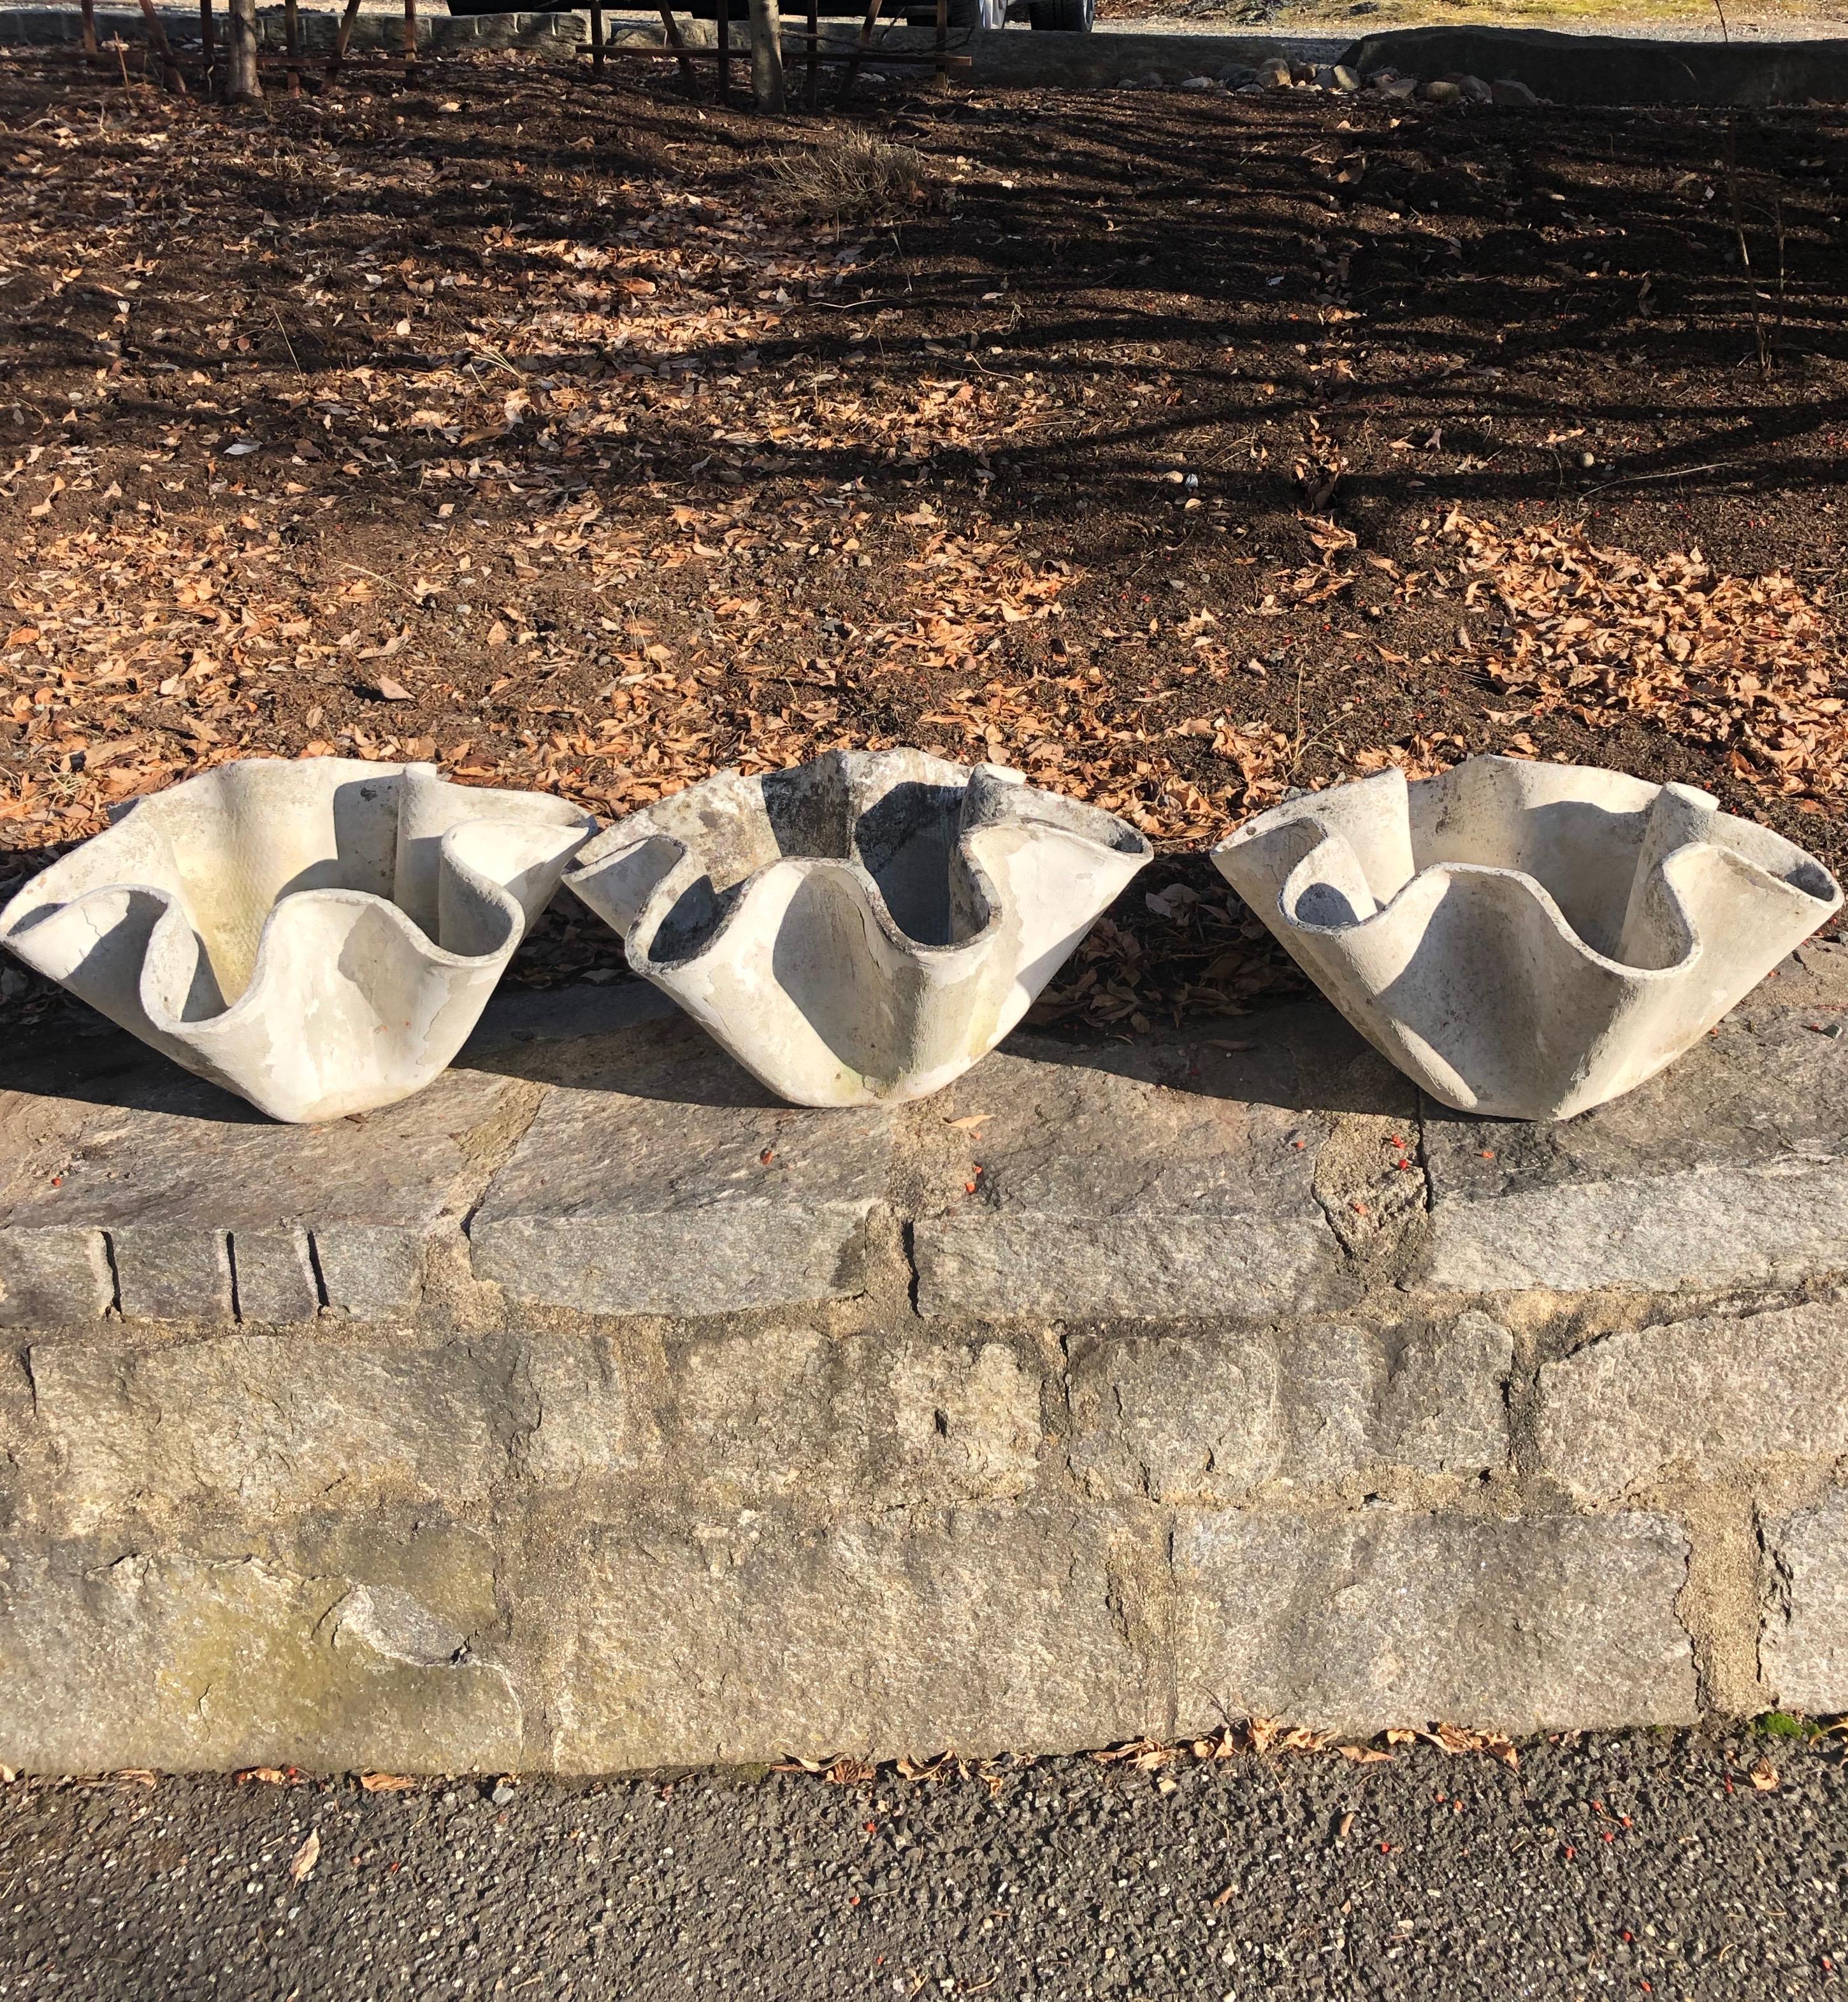 We love the taco-shell form of these planters that were made in two sizes by Eternit and designed by the iconic Willy Guhl in the 1960s. These are the smaller of the two sizes, although we also have four of the larger ones available as well (Stock #